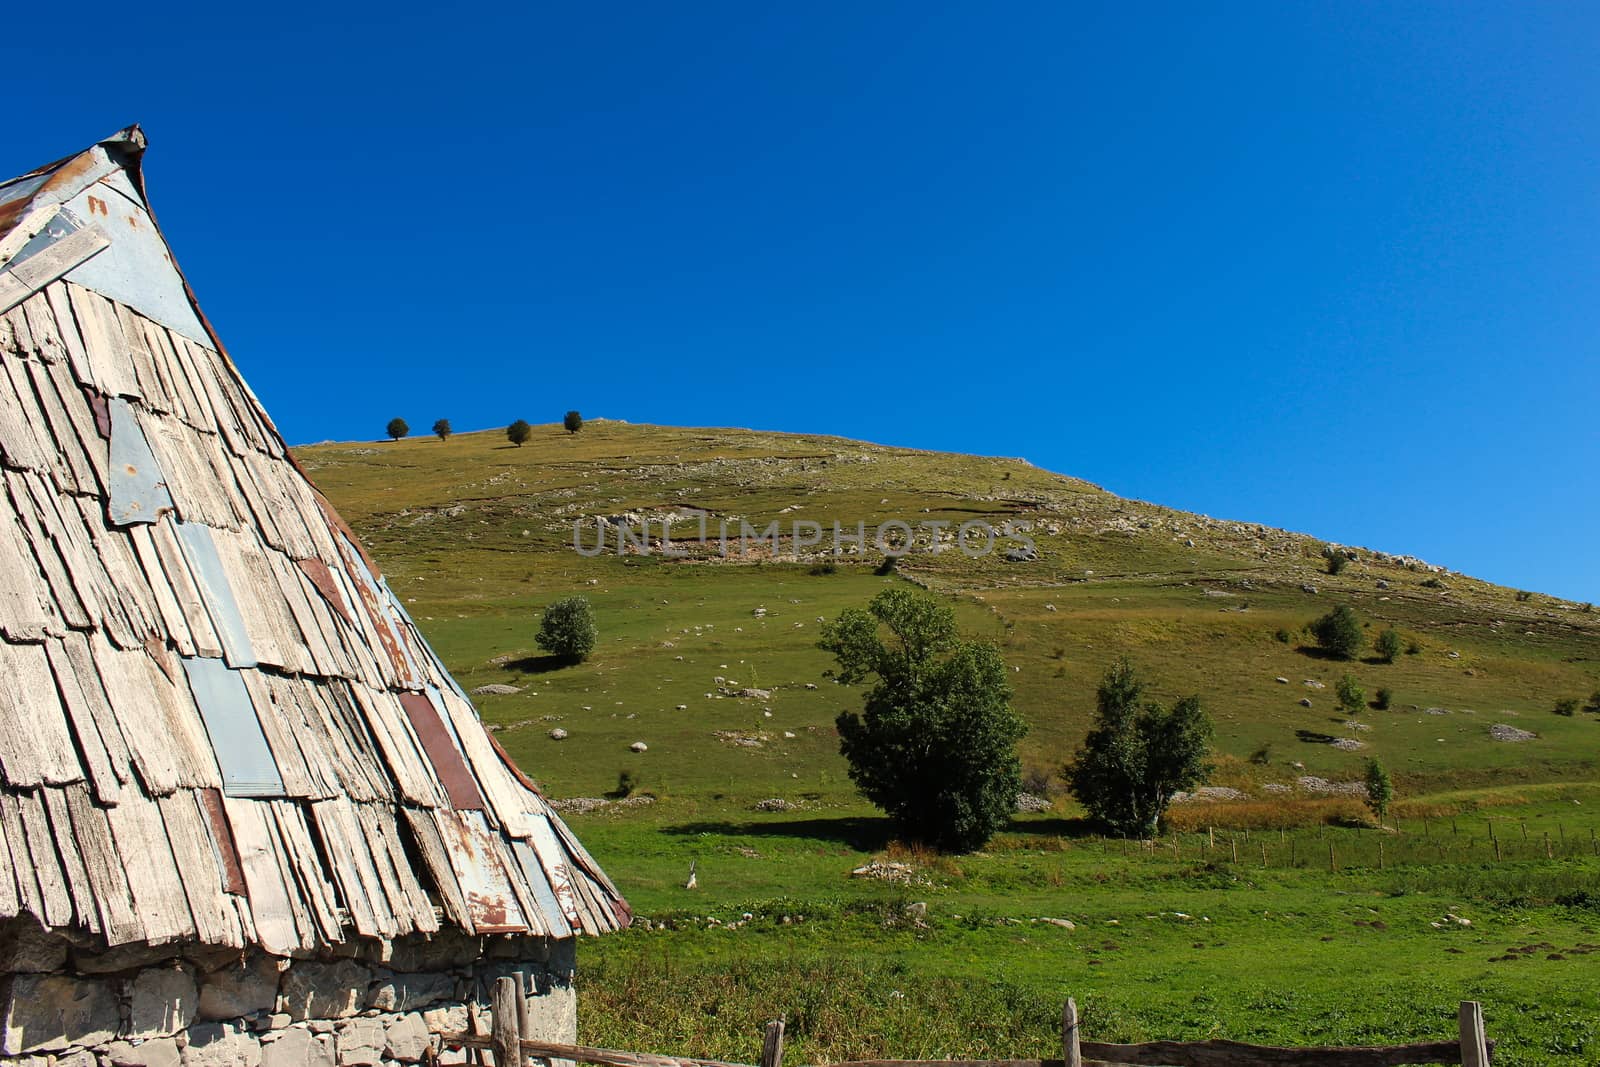 Part of the house and the roof of a Bosnian house with a view of the hill behind, in the old Bosnian village of Lukomir on the Bjelasnica mountain.